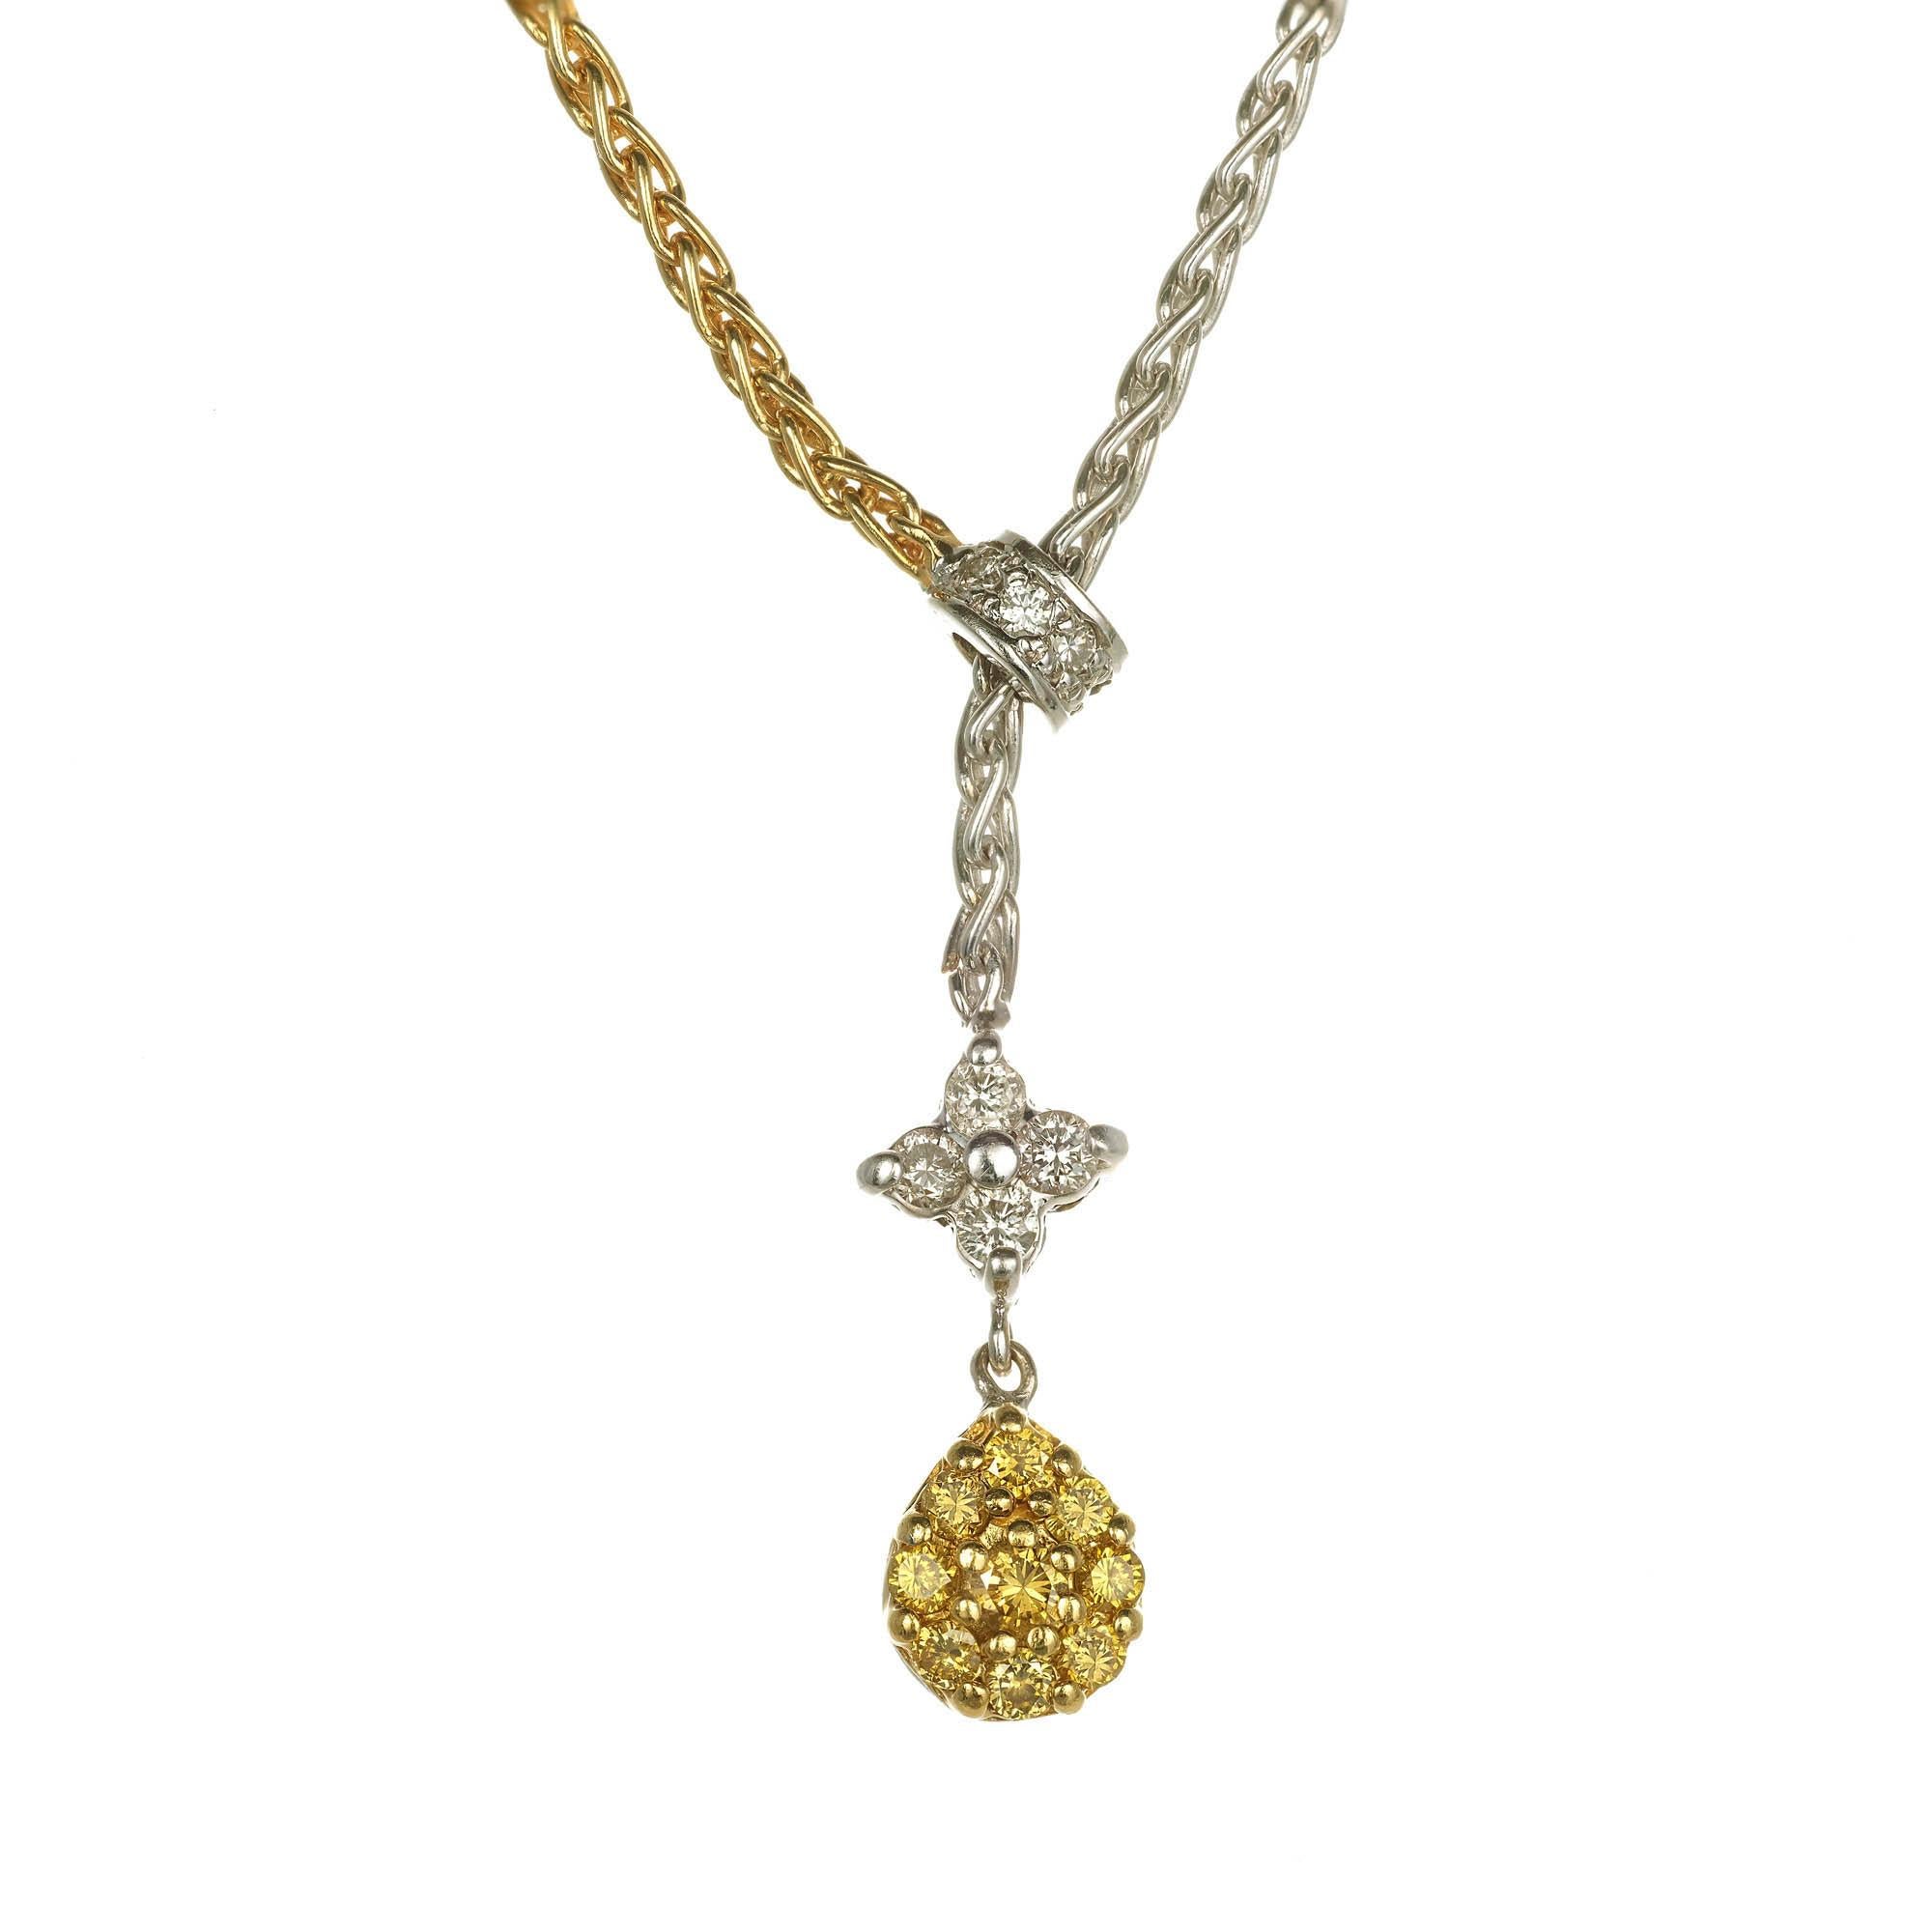 18k Two tone diamond design necklace. An 18k yellow gold 8 inch chain by a diamond set rondelle that slides up and down white gold chain. The white gold chain also suspends a diamond set star and drop pendant which has alternating sides of fancy